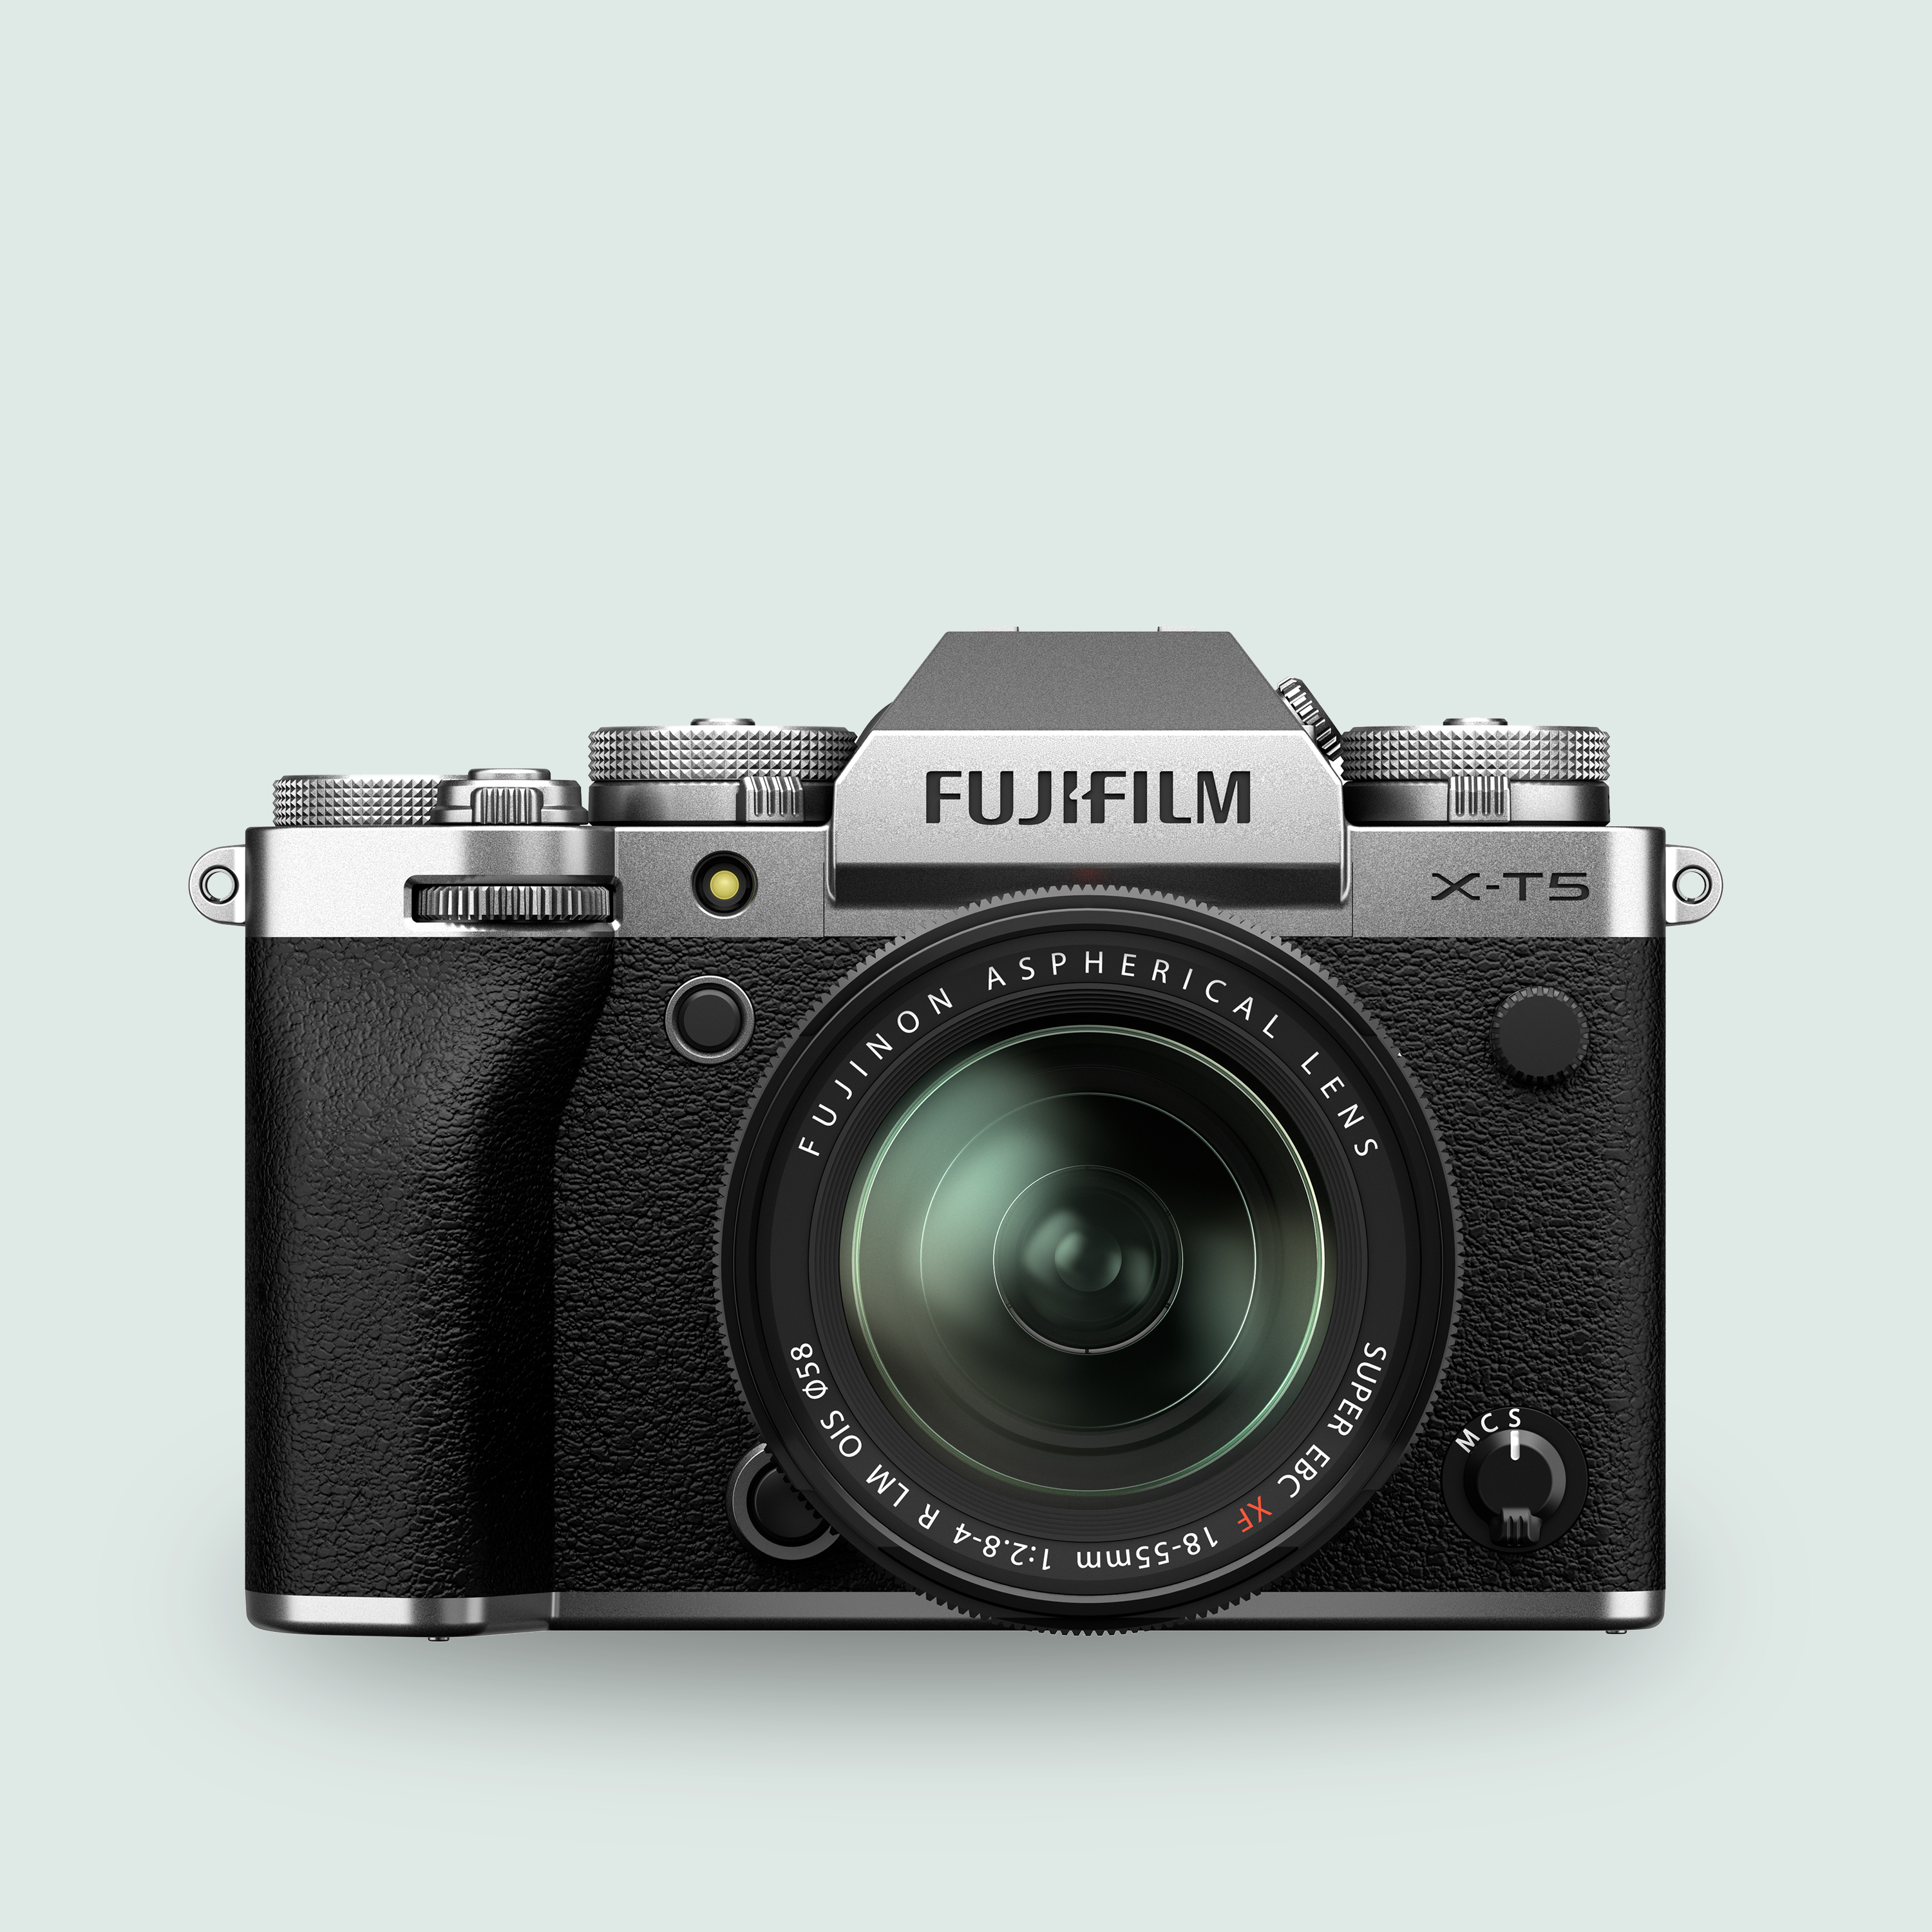 Fujifilm Xt5 Mirrorless Camera Body And Silver Xf 18 To 55mm F2.8-4 R Lm  Ois Lens, Mirrorless, Electronics